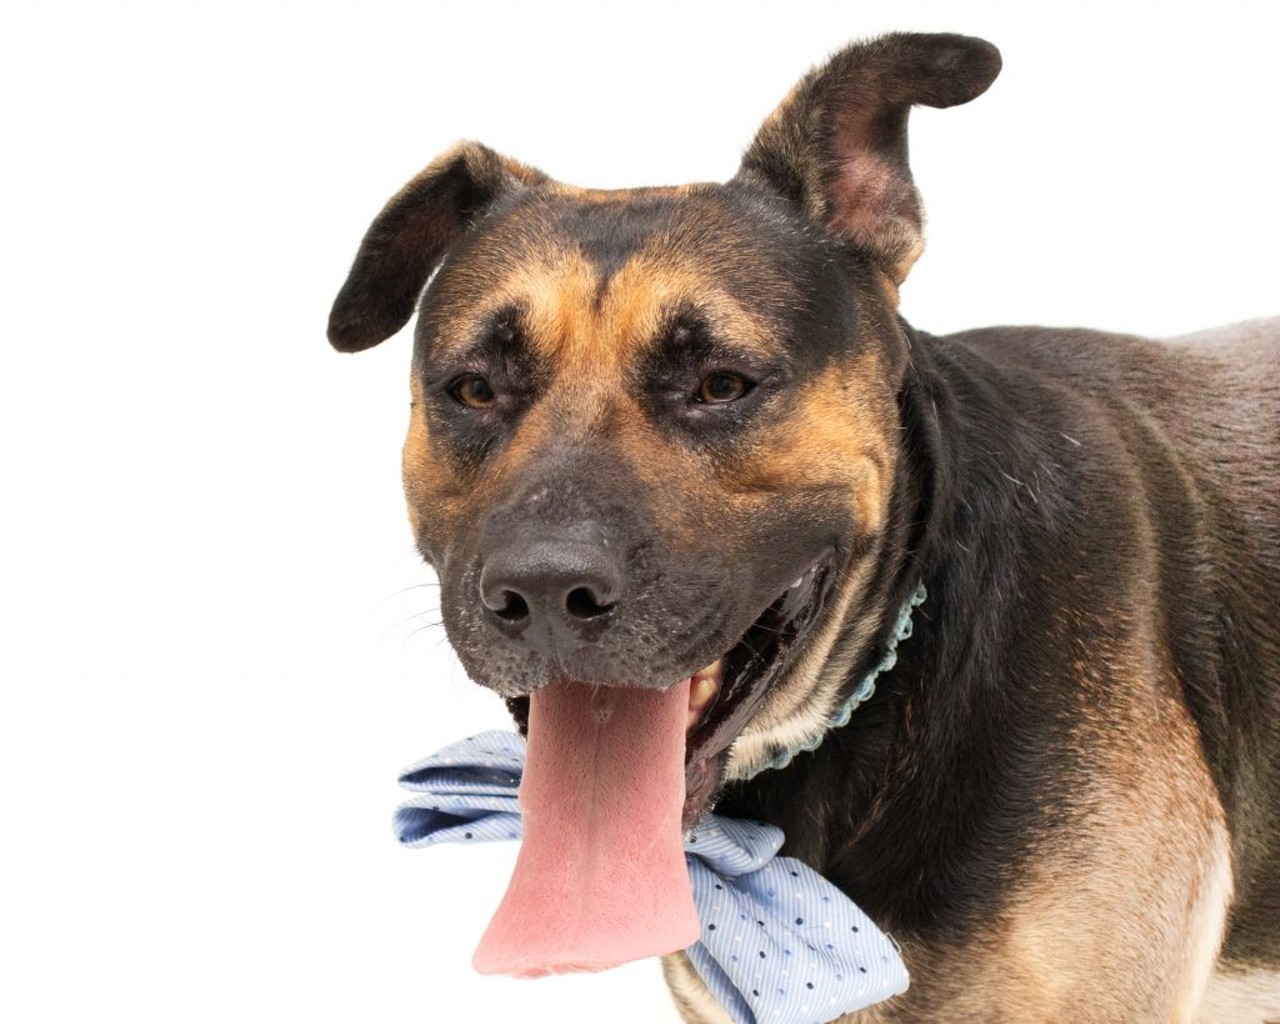 10 adoptable dogs available right now at Orange County Animal Services